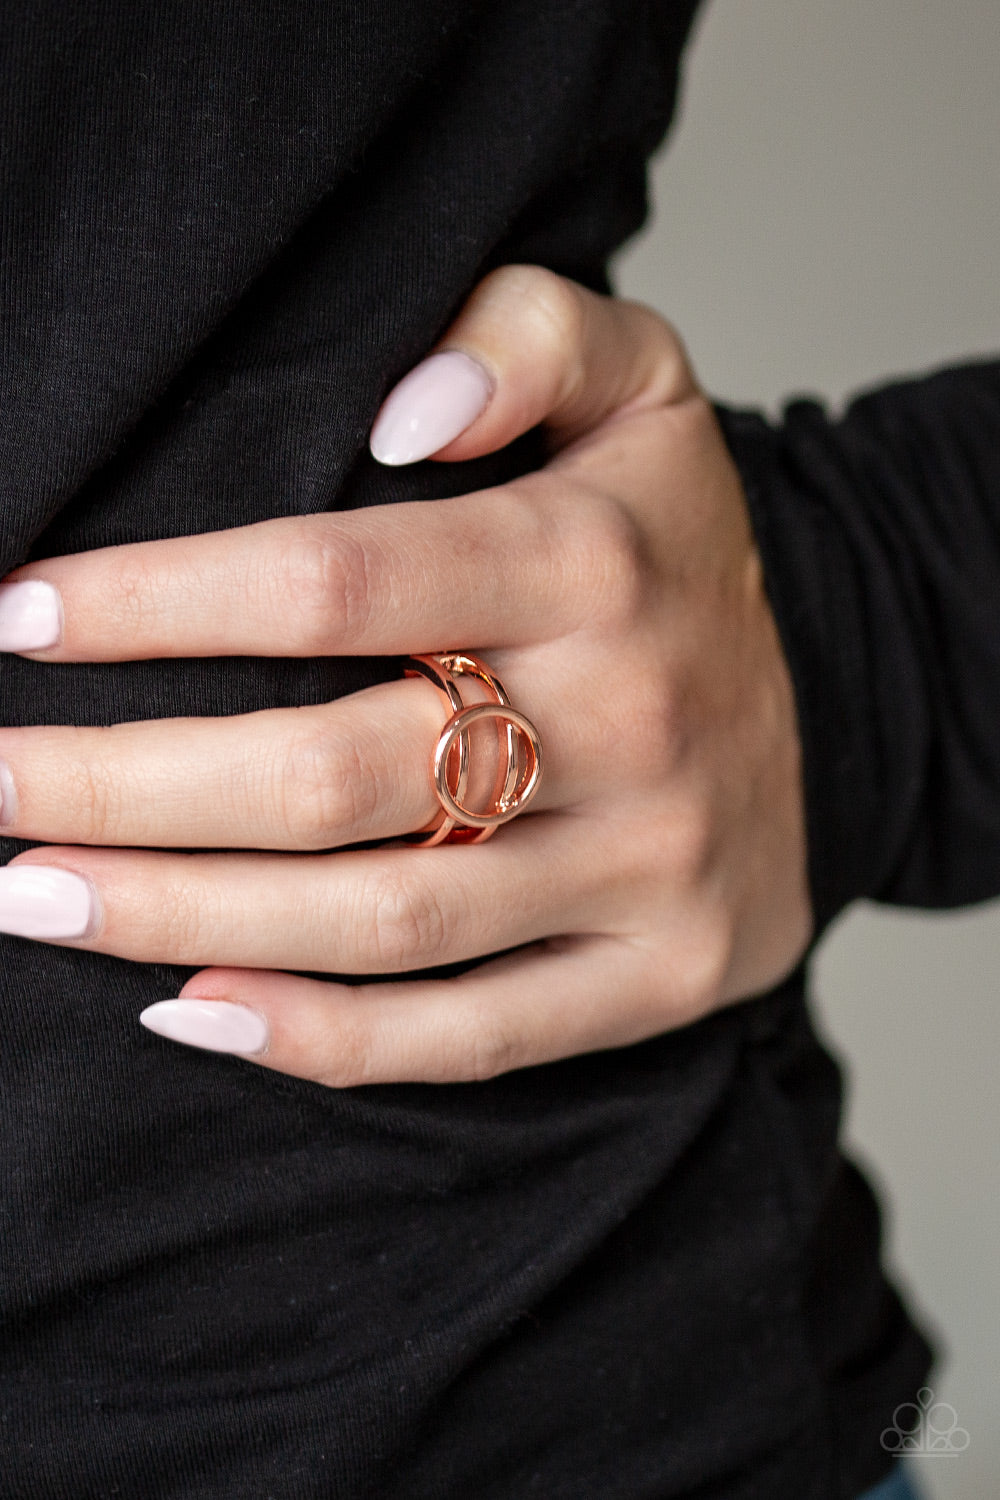 CITY CENTER CHIC - COPPER HOLLOW CIRCLE RING